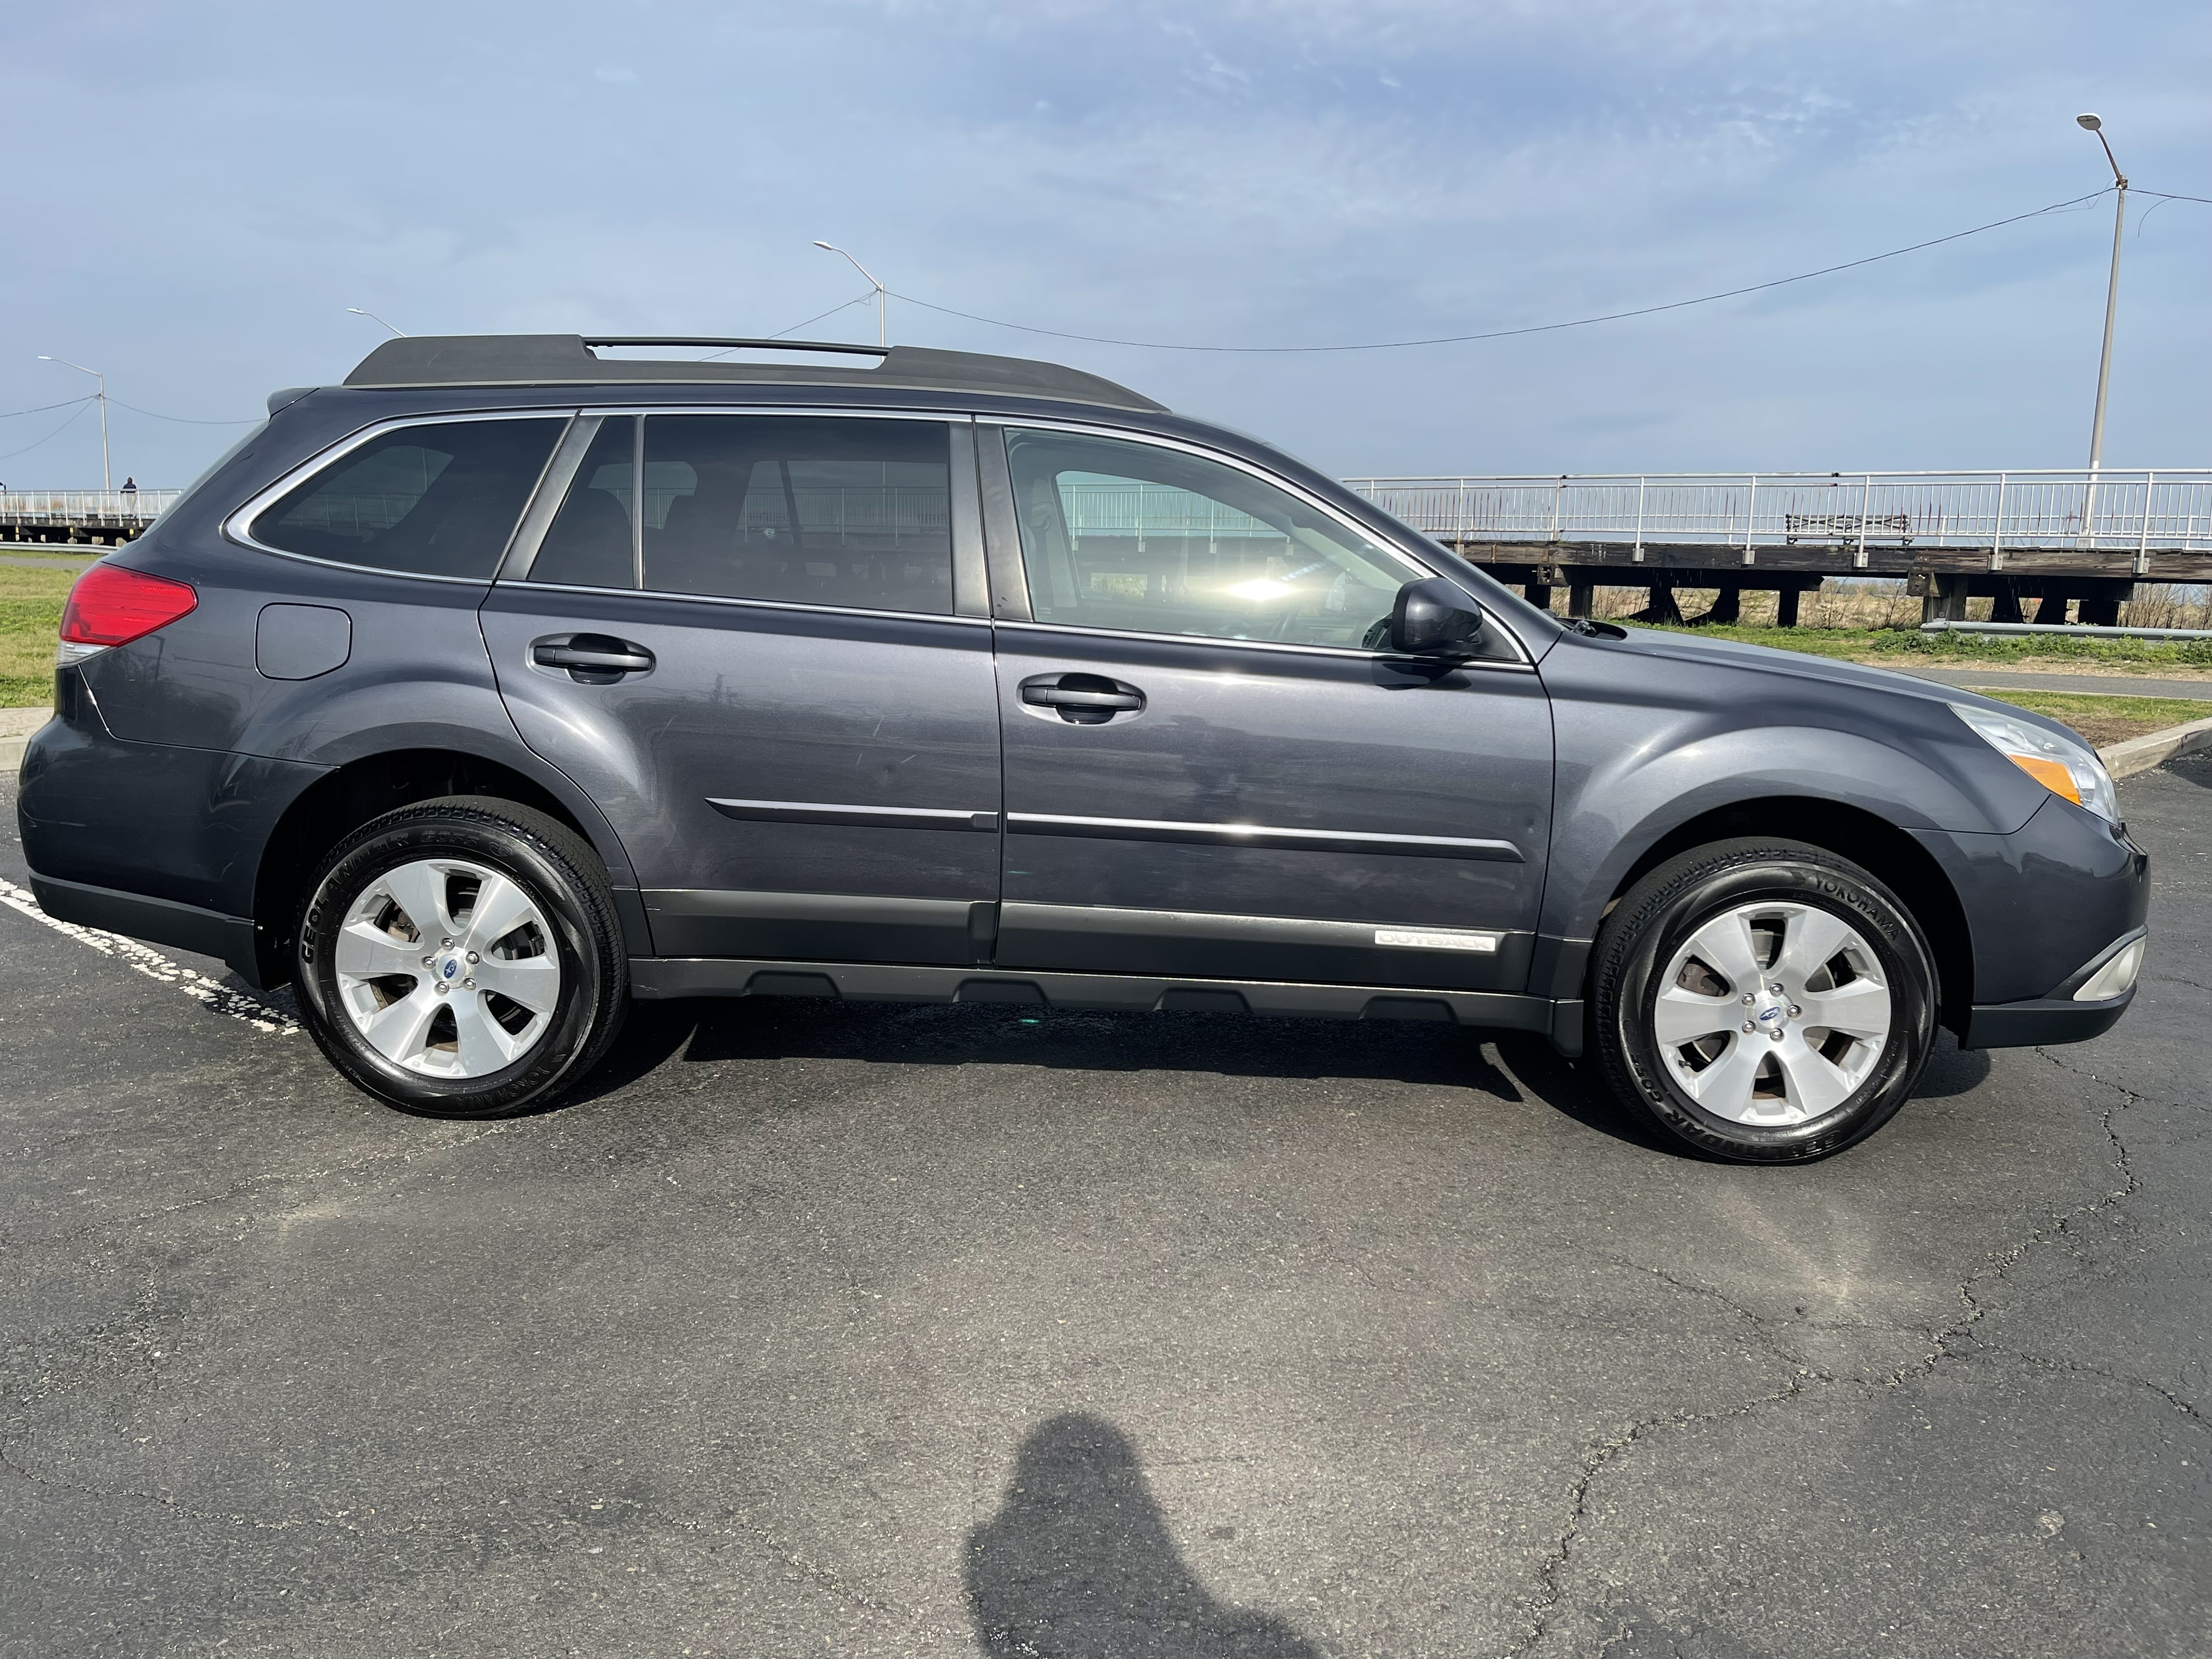 Used - Subaru Outback 3.6R Limited AWD Wagon for sale in Staten Island NY